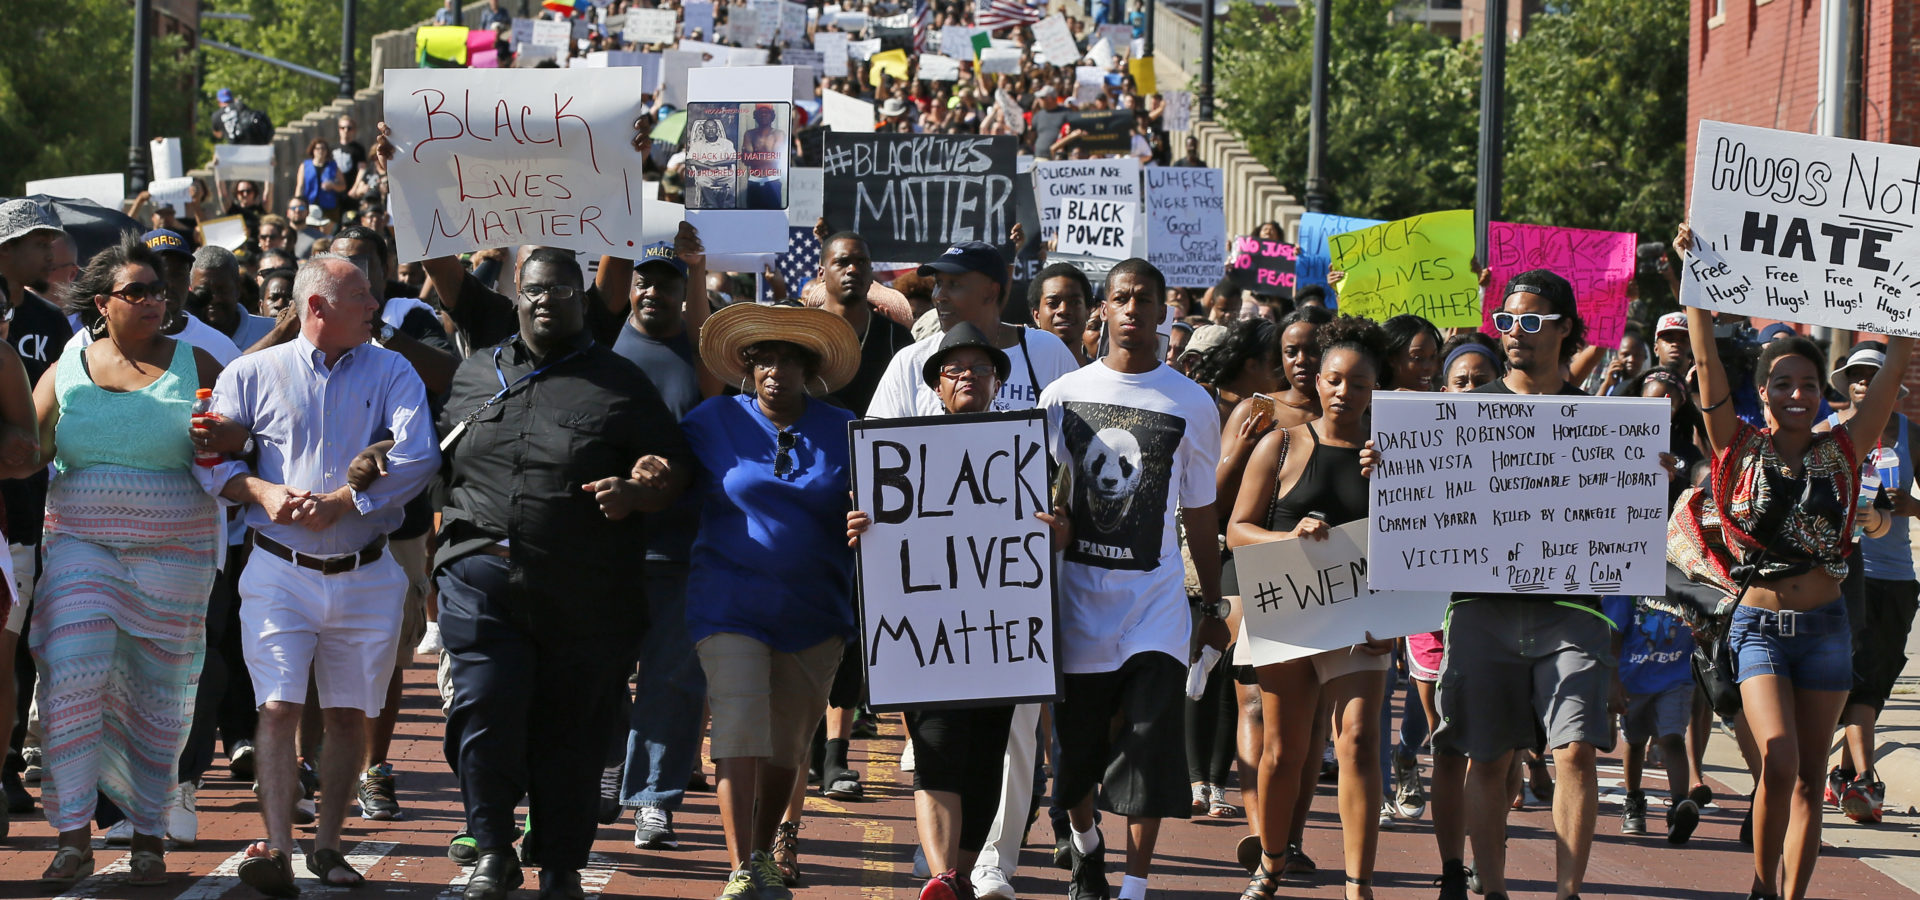 People march in a Black Lives Matter rally in Oklahoma City, Sunday, July 10, 2016.